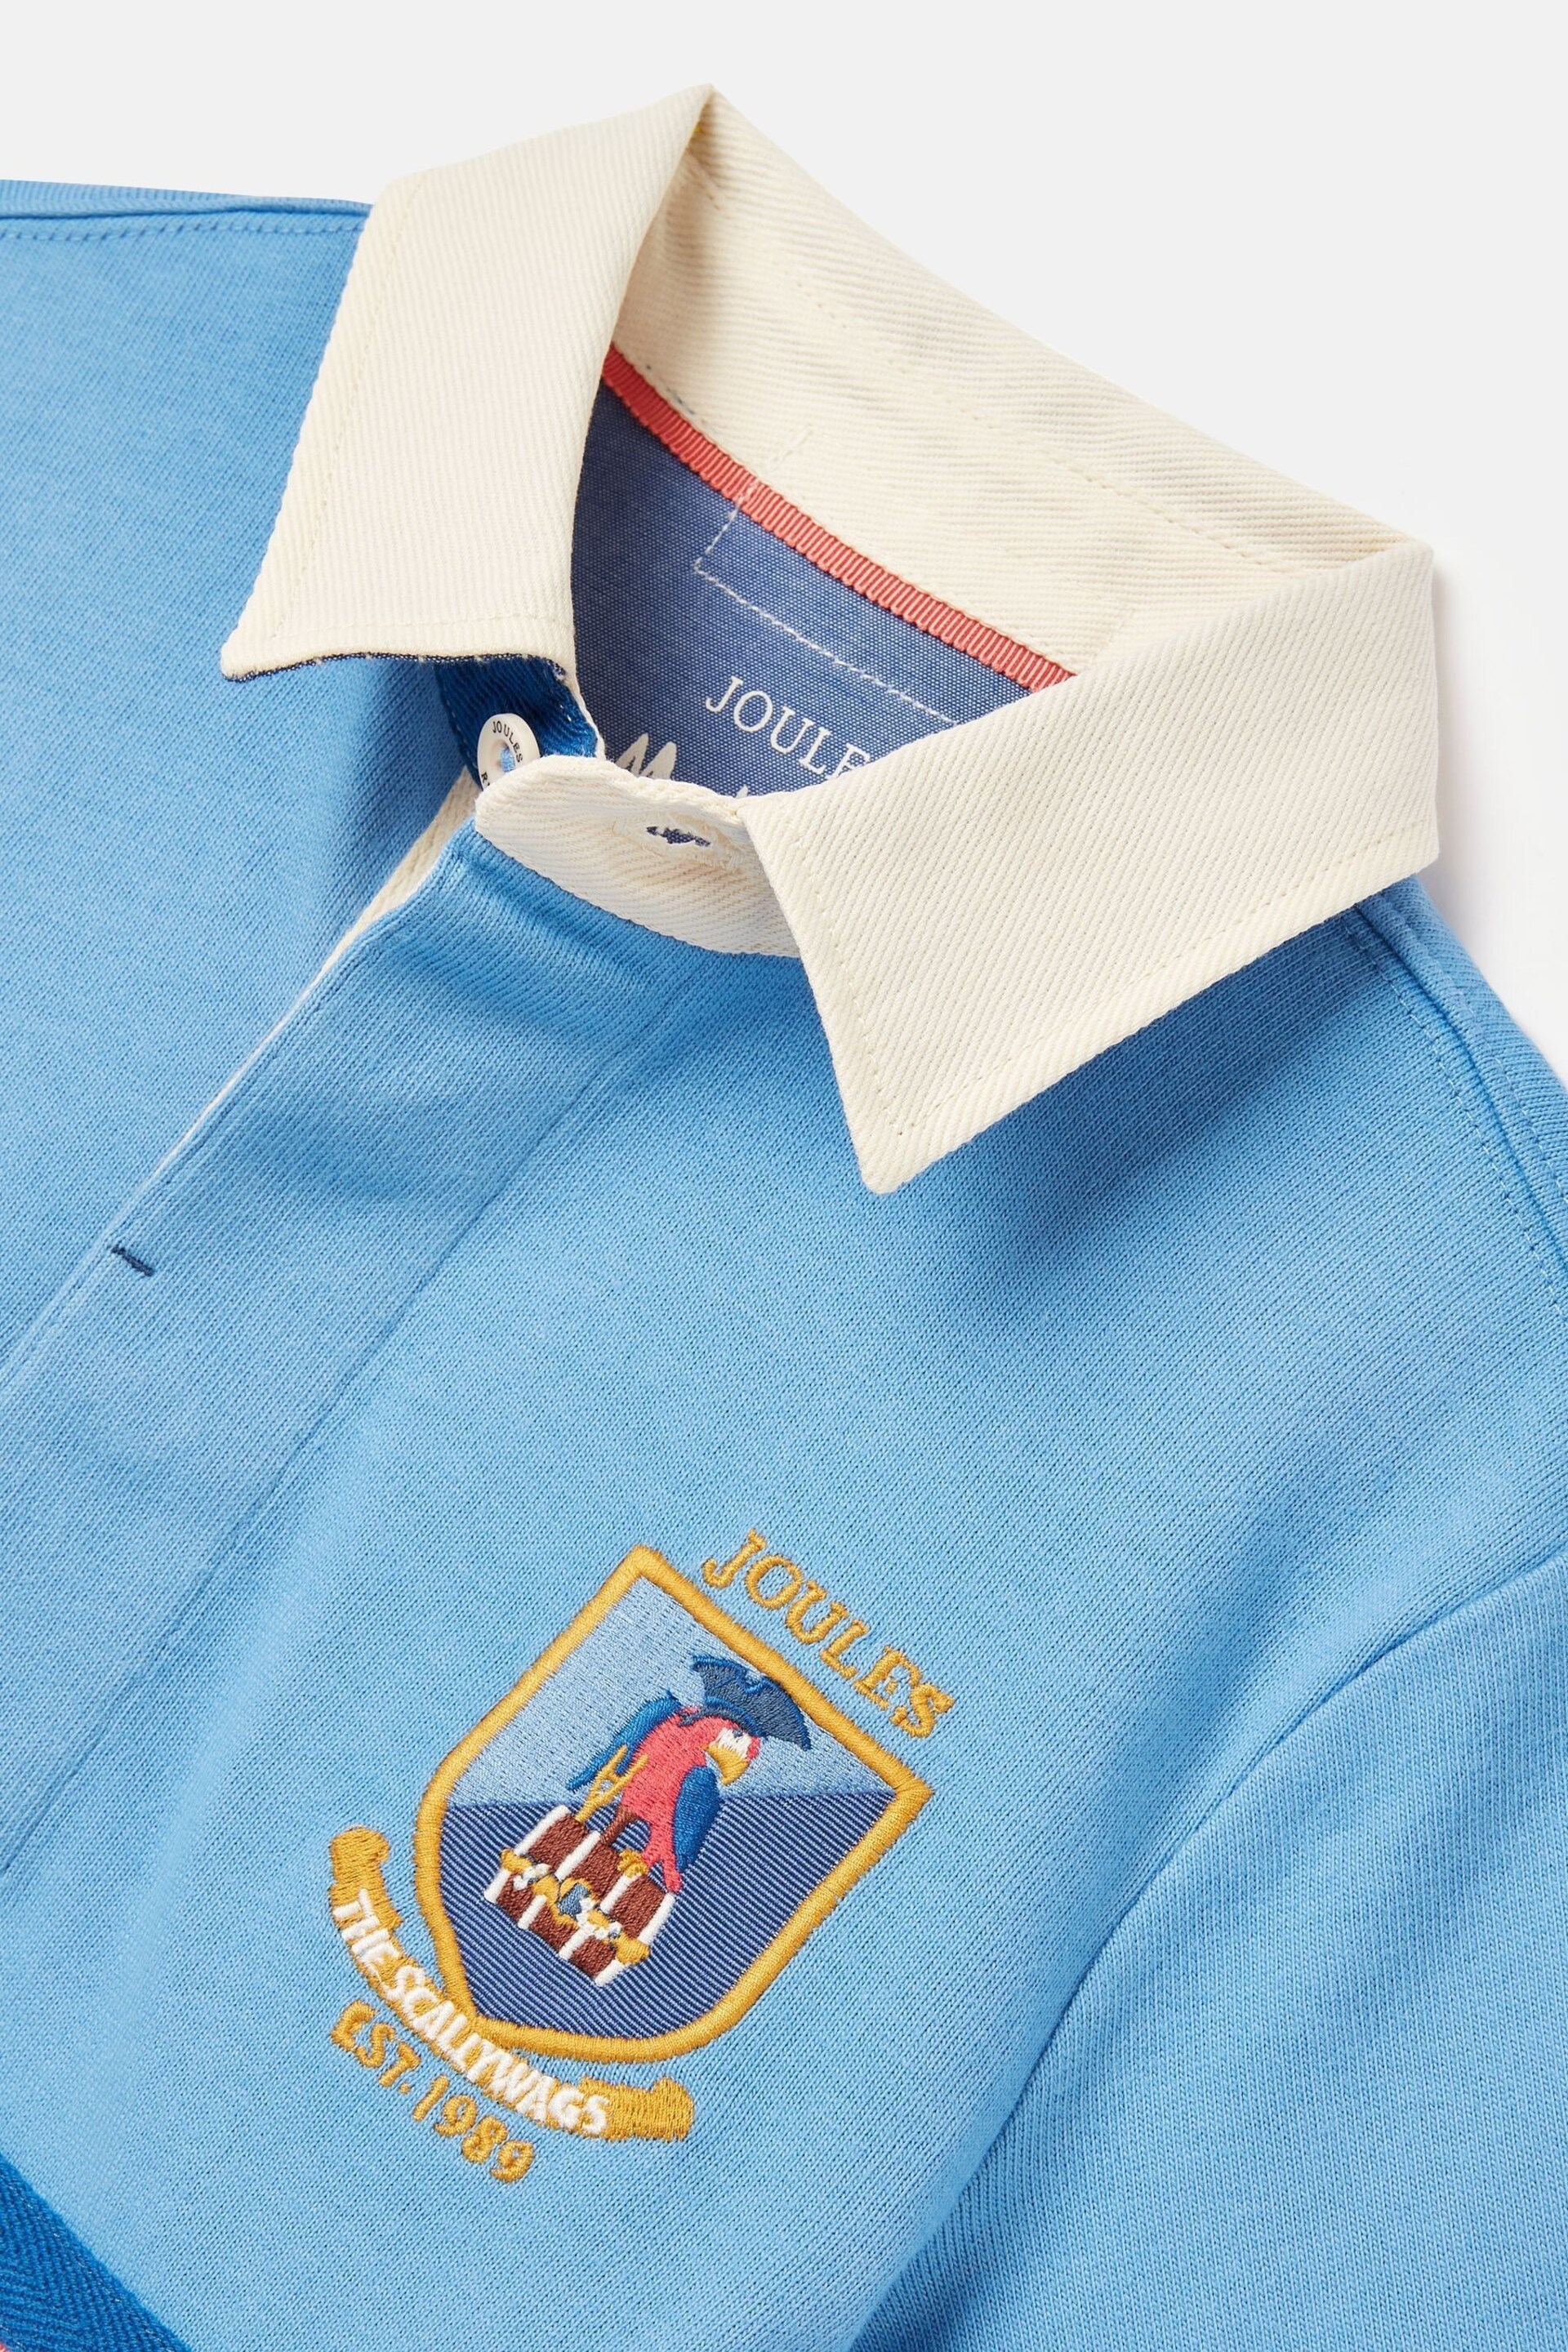 Joules Tournament Blue Rugby Jersey Polo Shirt - Image 5 of 8